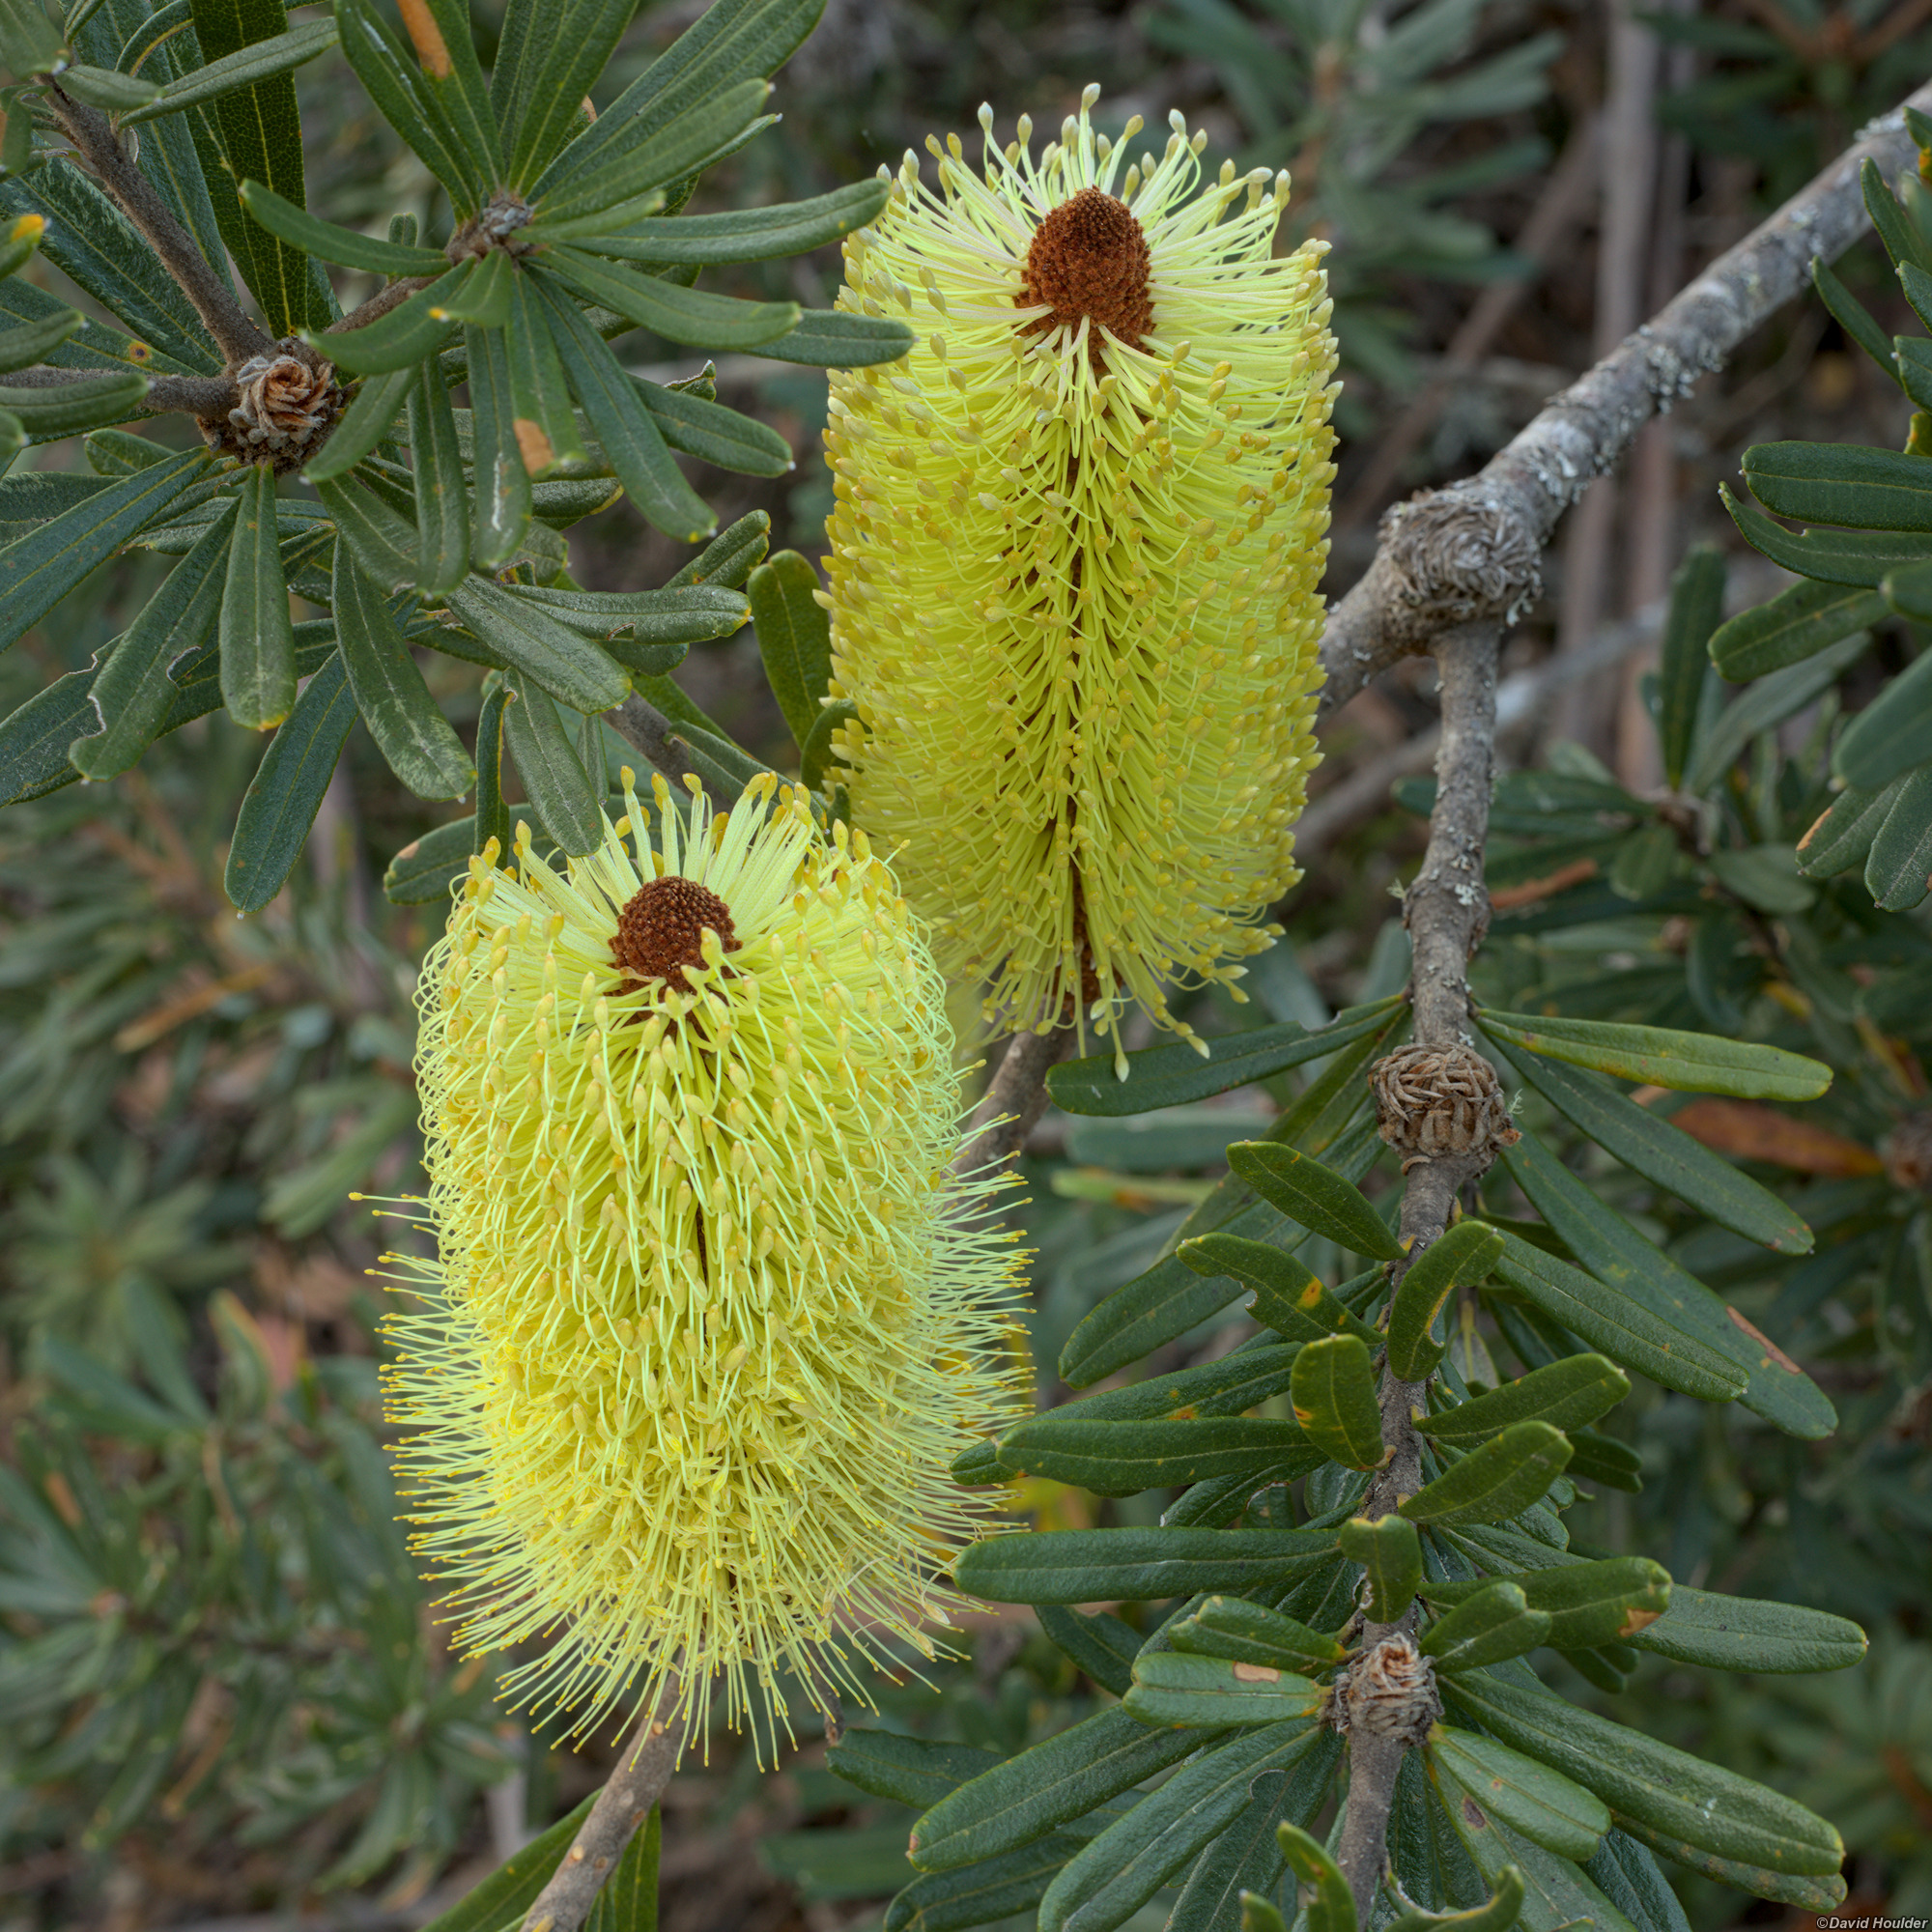 Banksia flowers at Narcissus Bay